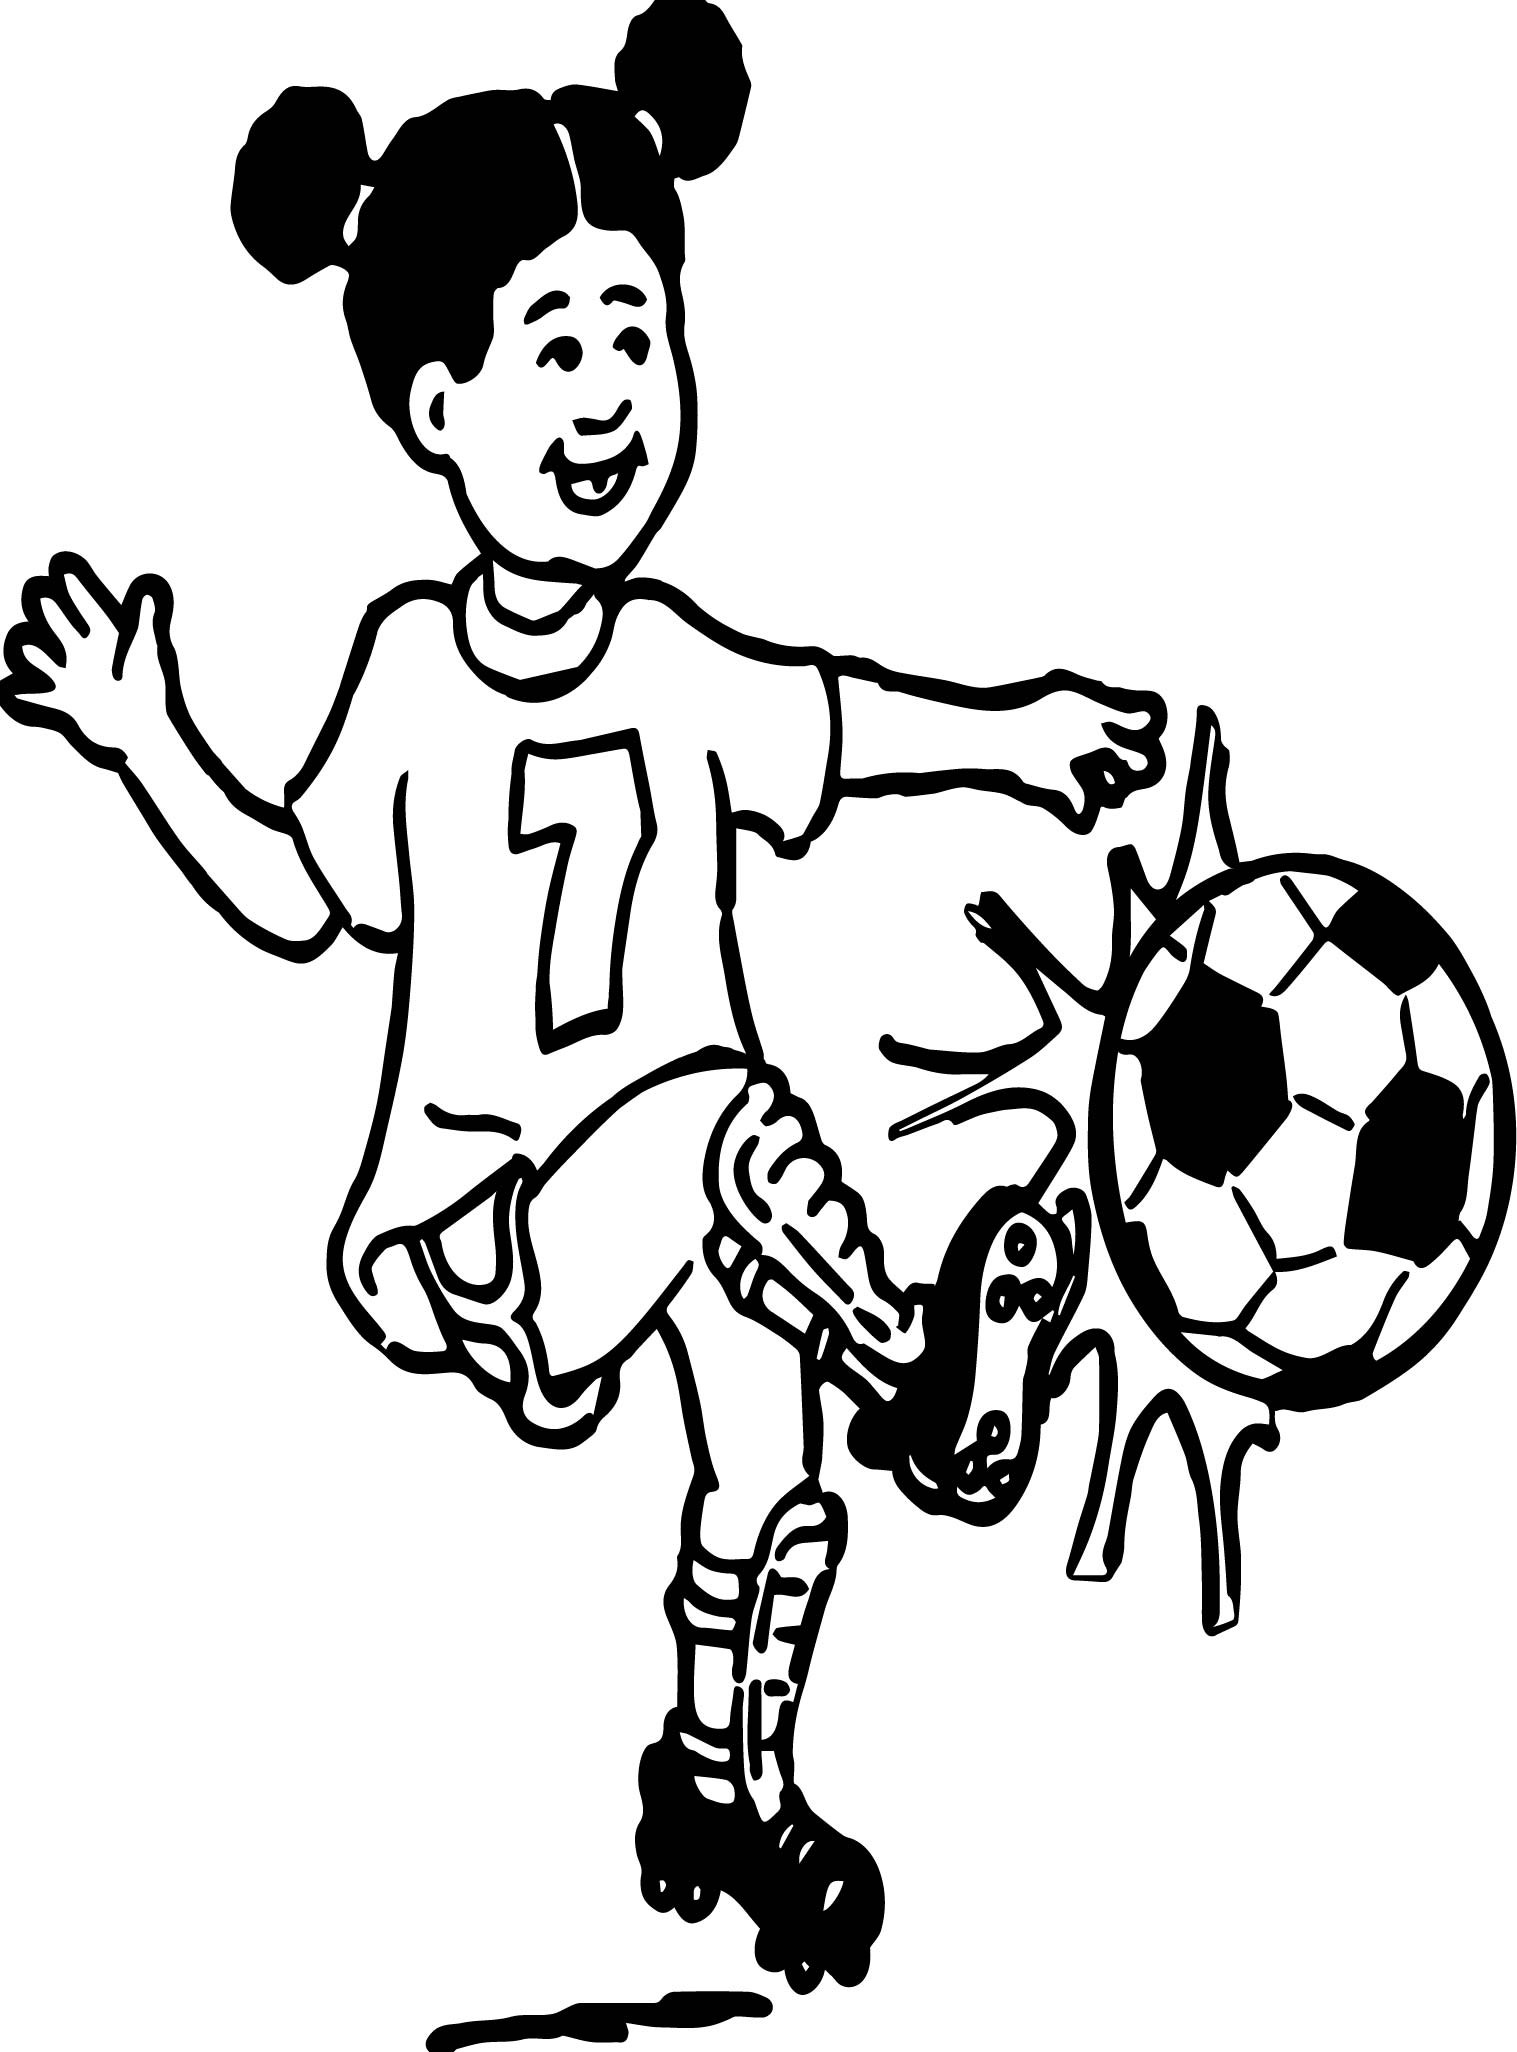 Girl Soccer Player Coloring Pages
 Girl Playing Soccer Playing Football Coloring Page